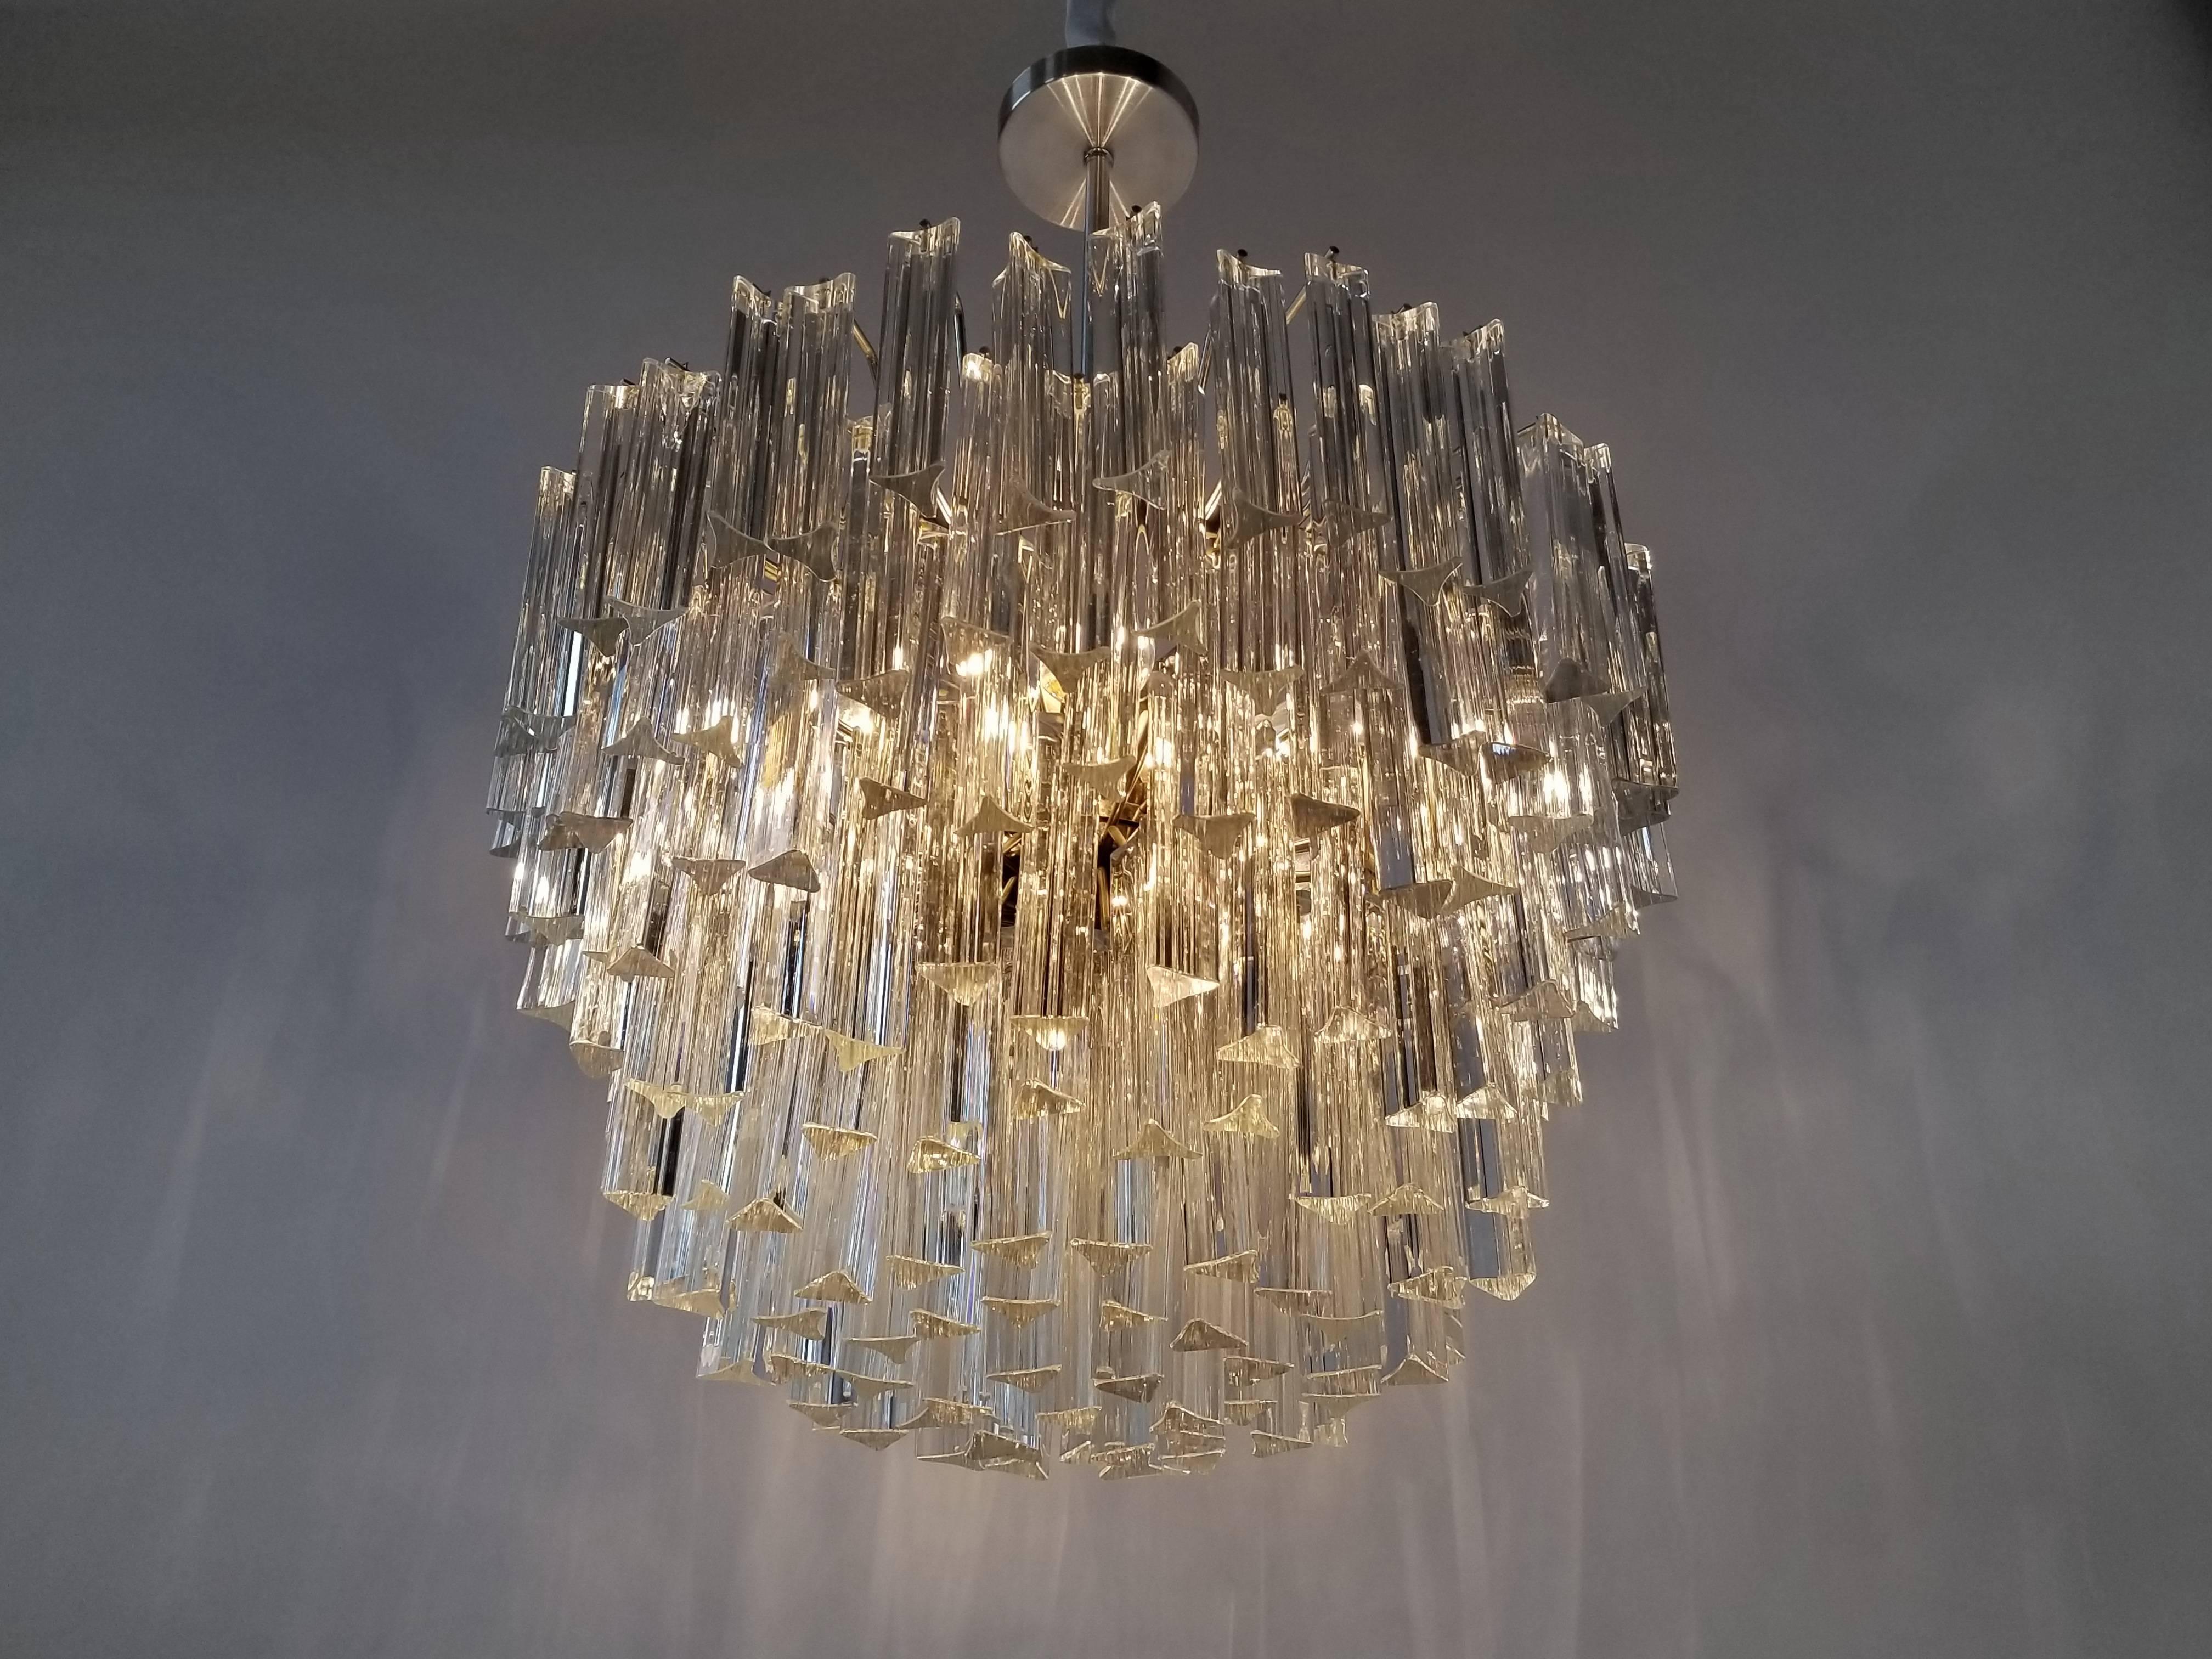 Massive Camer/ Venini optical glass quality prism chandelier.

Solid, well made handcrafted steel structure.

8 regular E26 size ceramic socket rated at 100 watt. 

Total weight of fixture with glass, 110 pounds / 50 kilos.

 